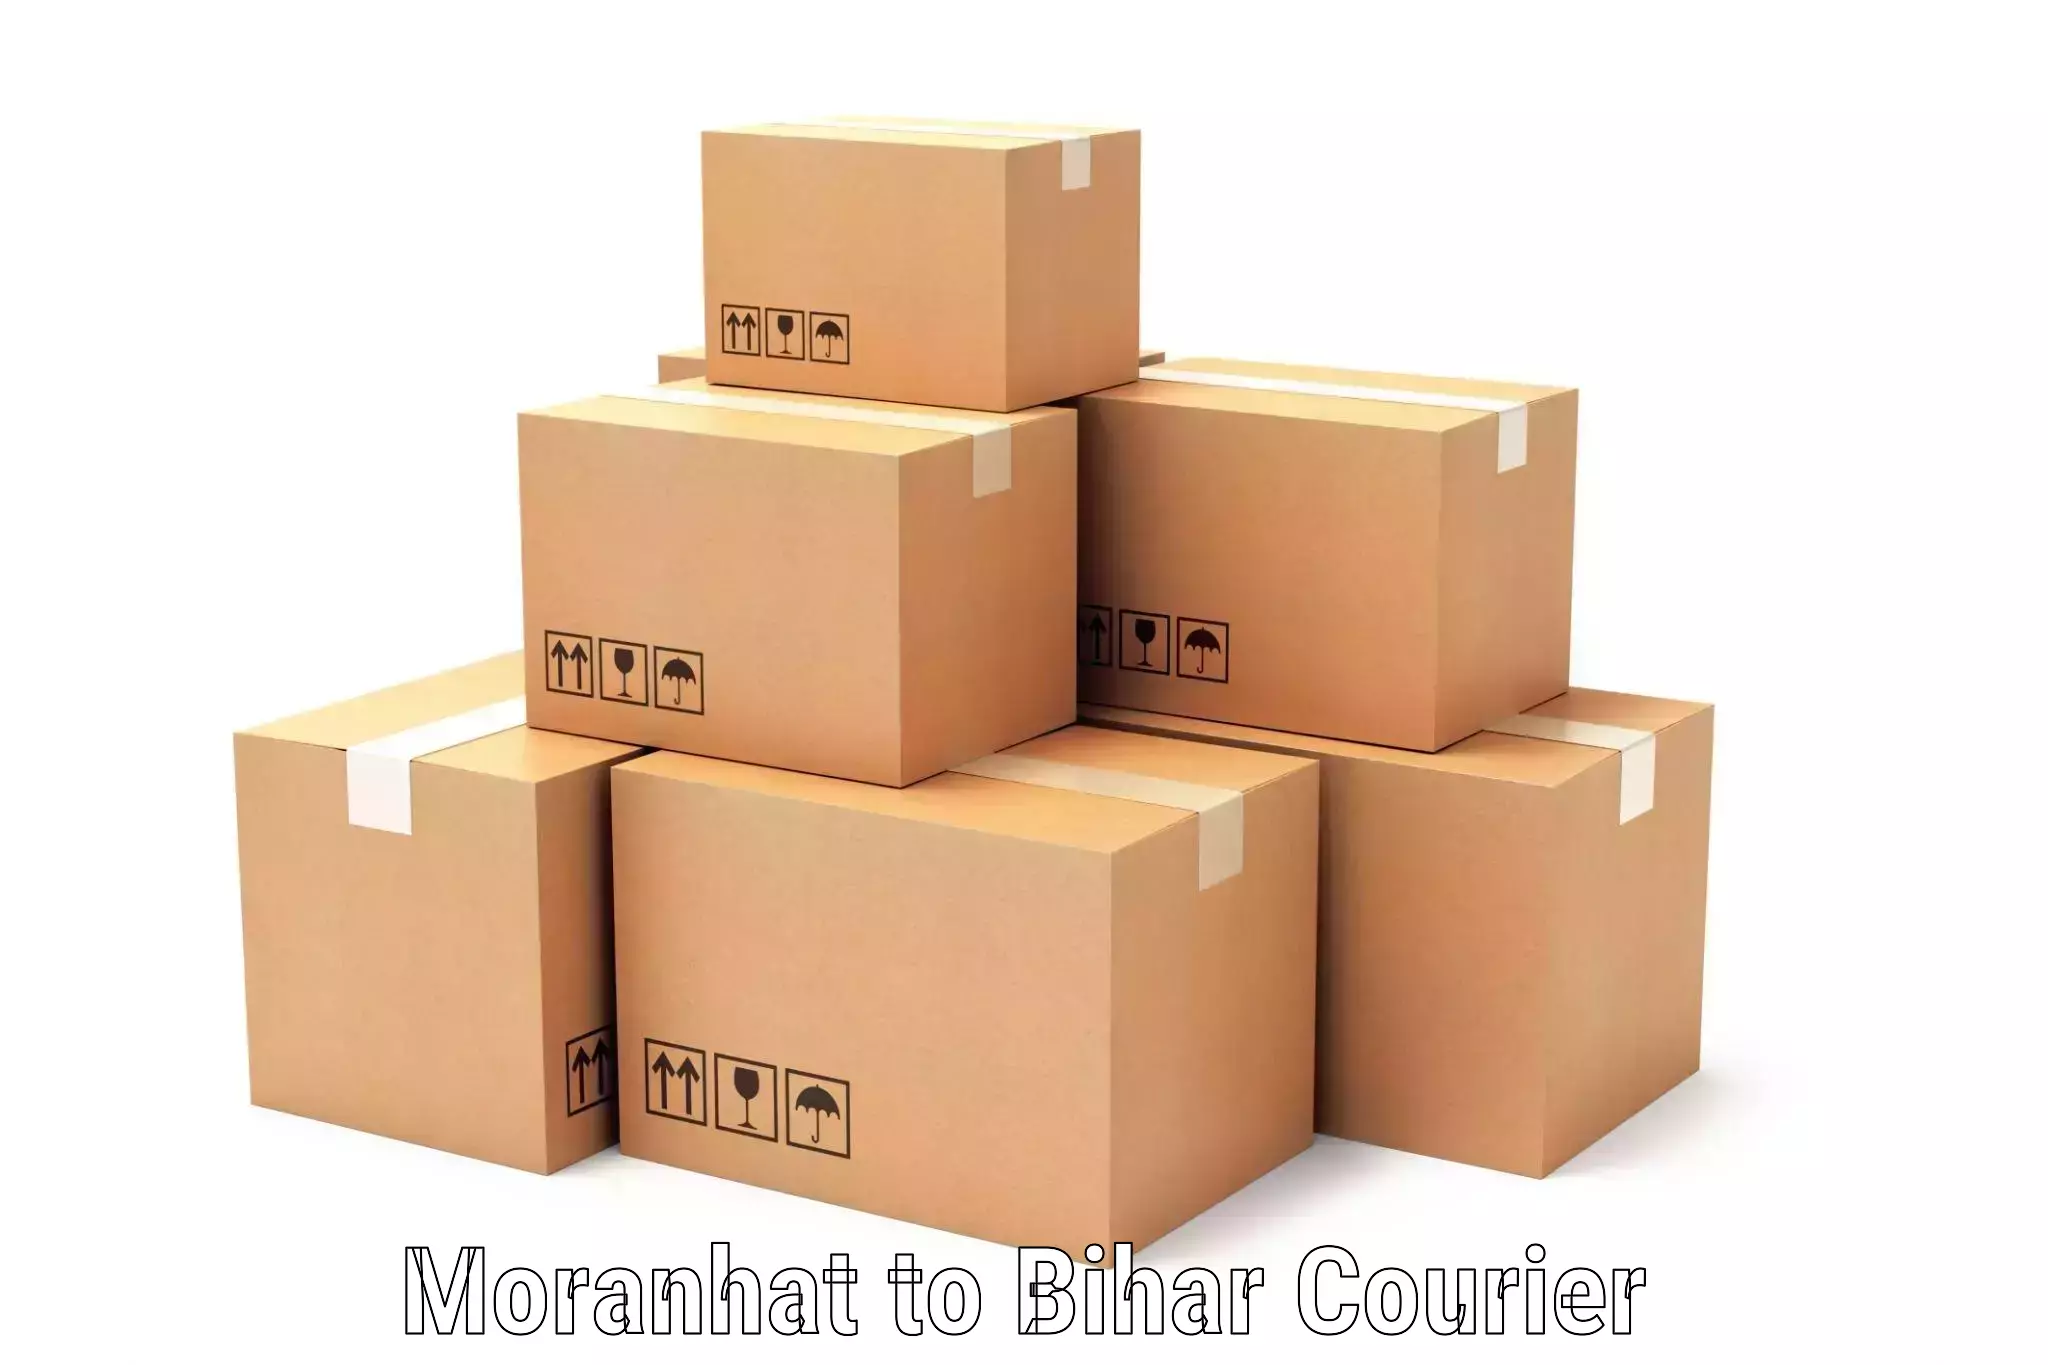 Tailored delivery services Moranhat to Biraul